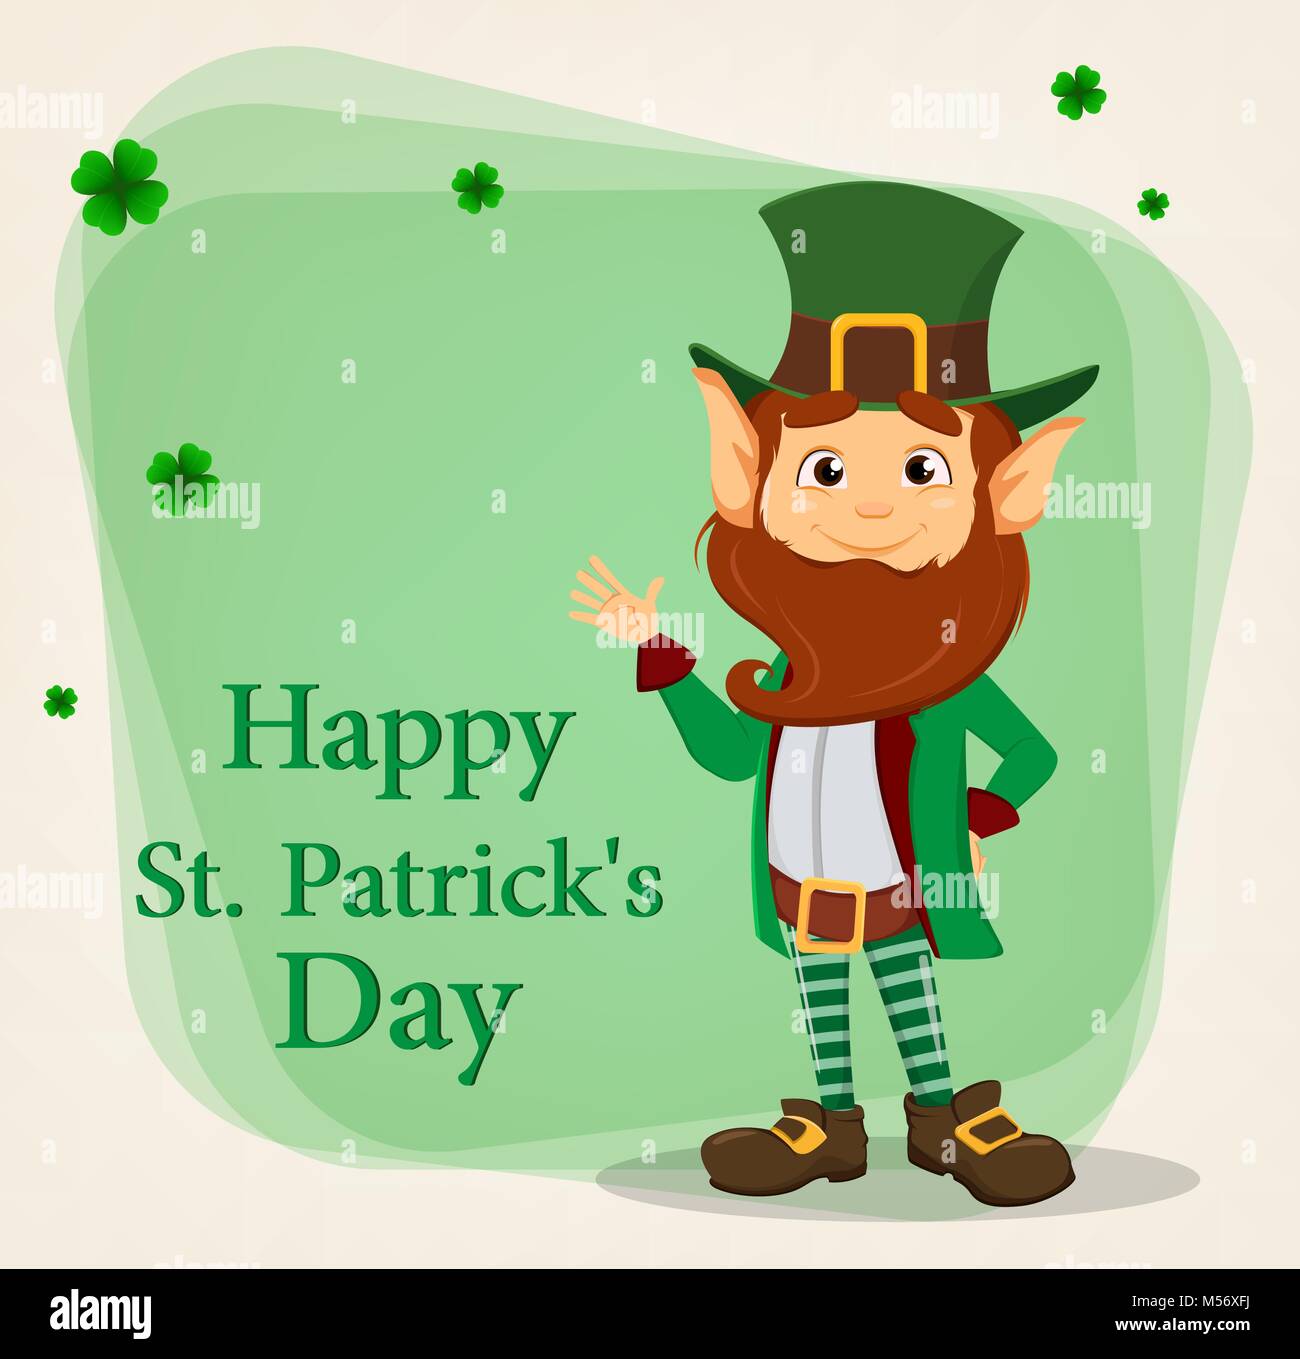 Happy Saint Patrick's Day. Character with green hat. Cartoon funny leprechaun waving hand. Vector illustration on background with clovers Stock Vector